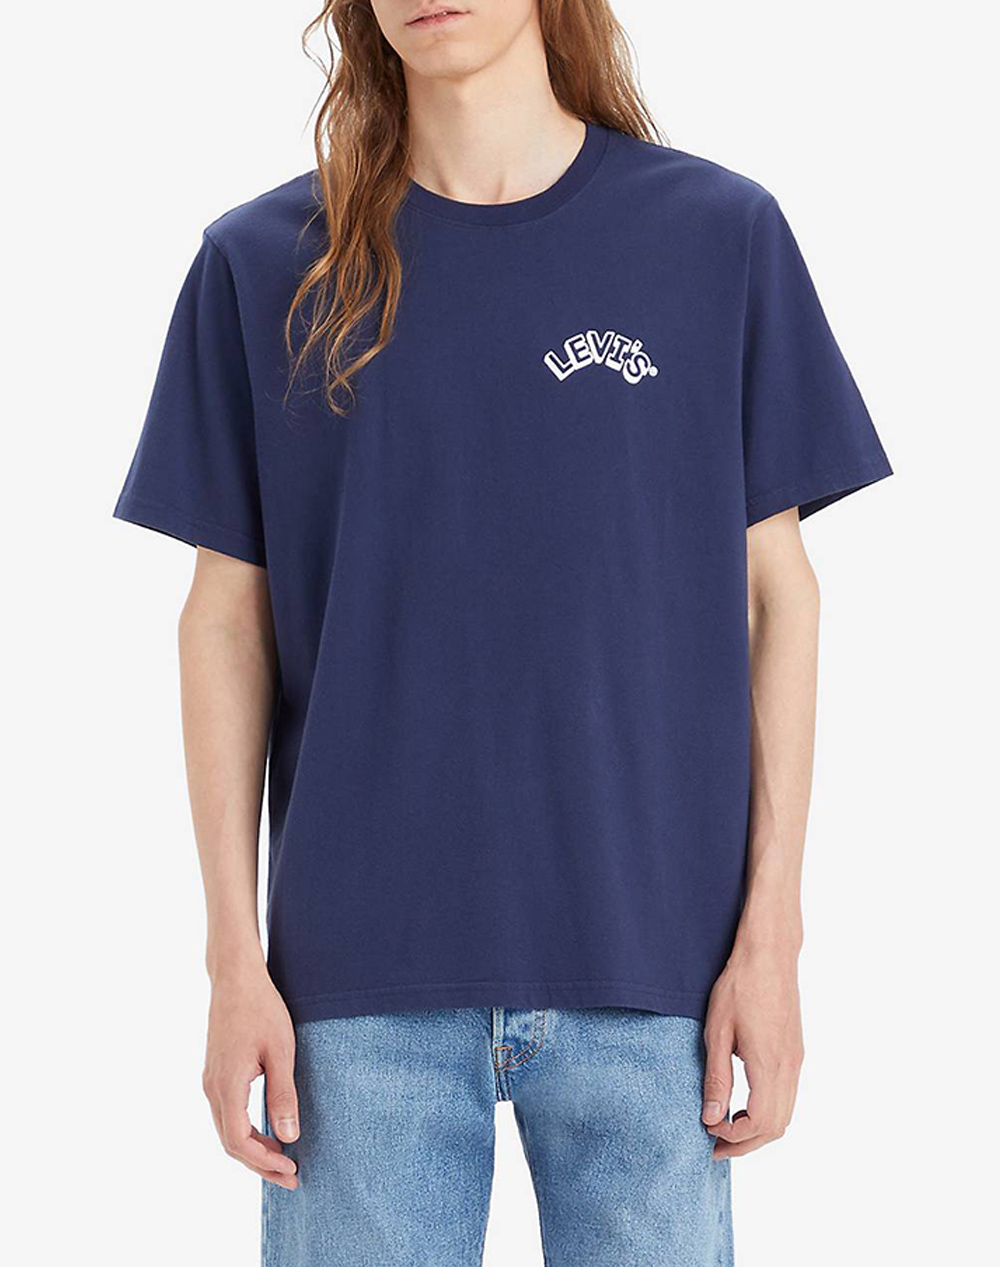 LEVIS SS RELAXED FIT TEE 16143-1311-1311 DarkBlue